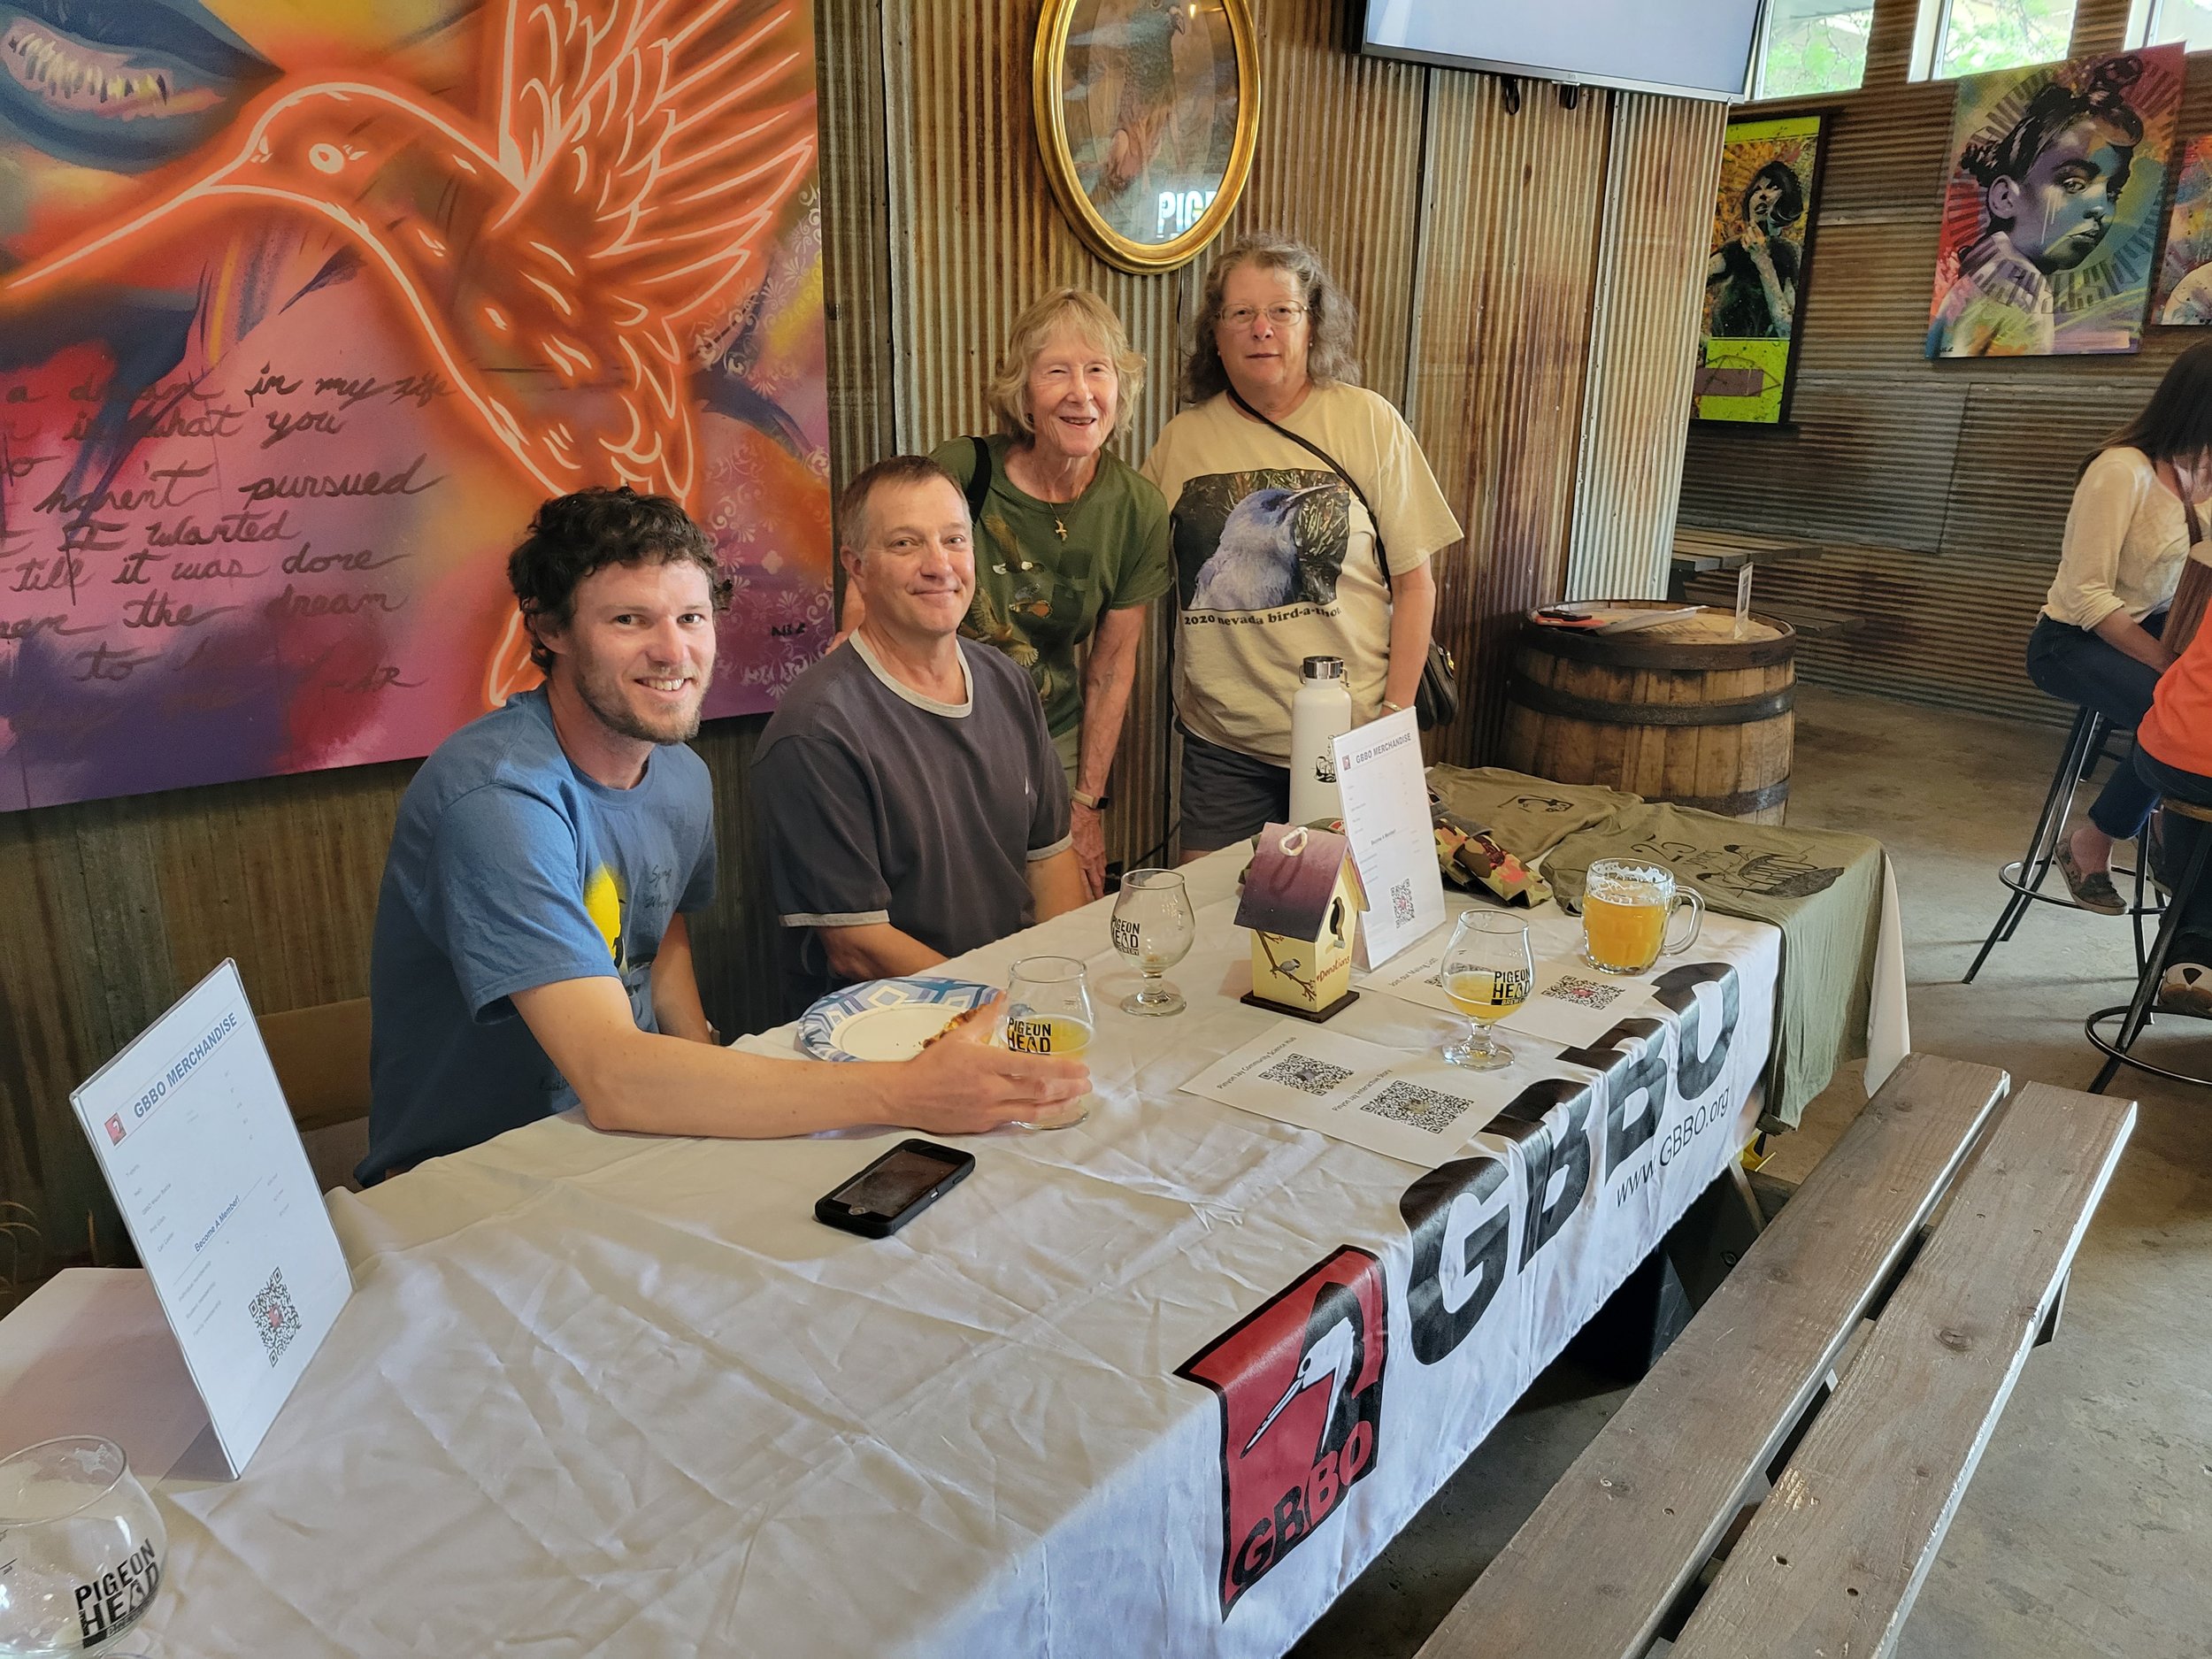 Northern Nevada Awards Ceremony and beer release at Pigeon Head Brewery